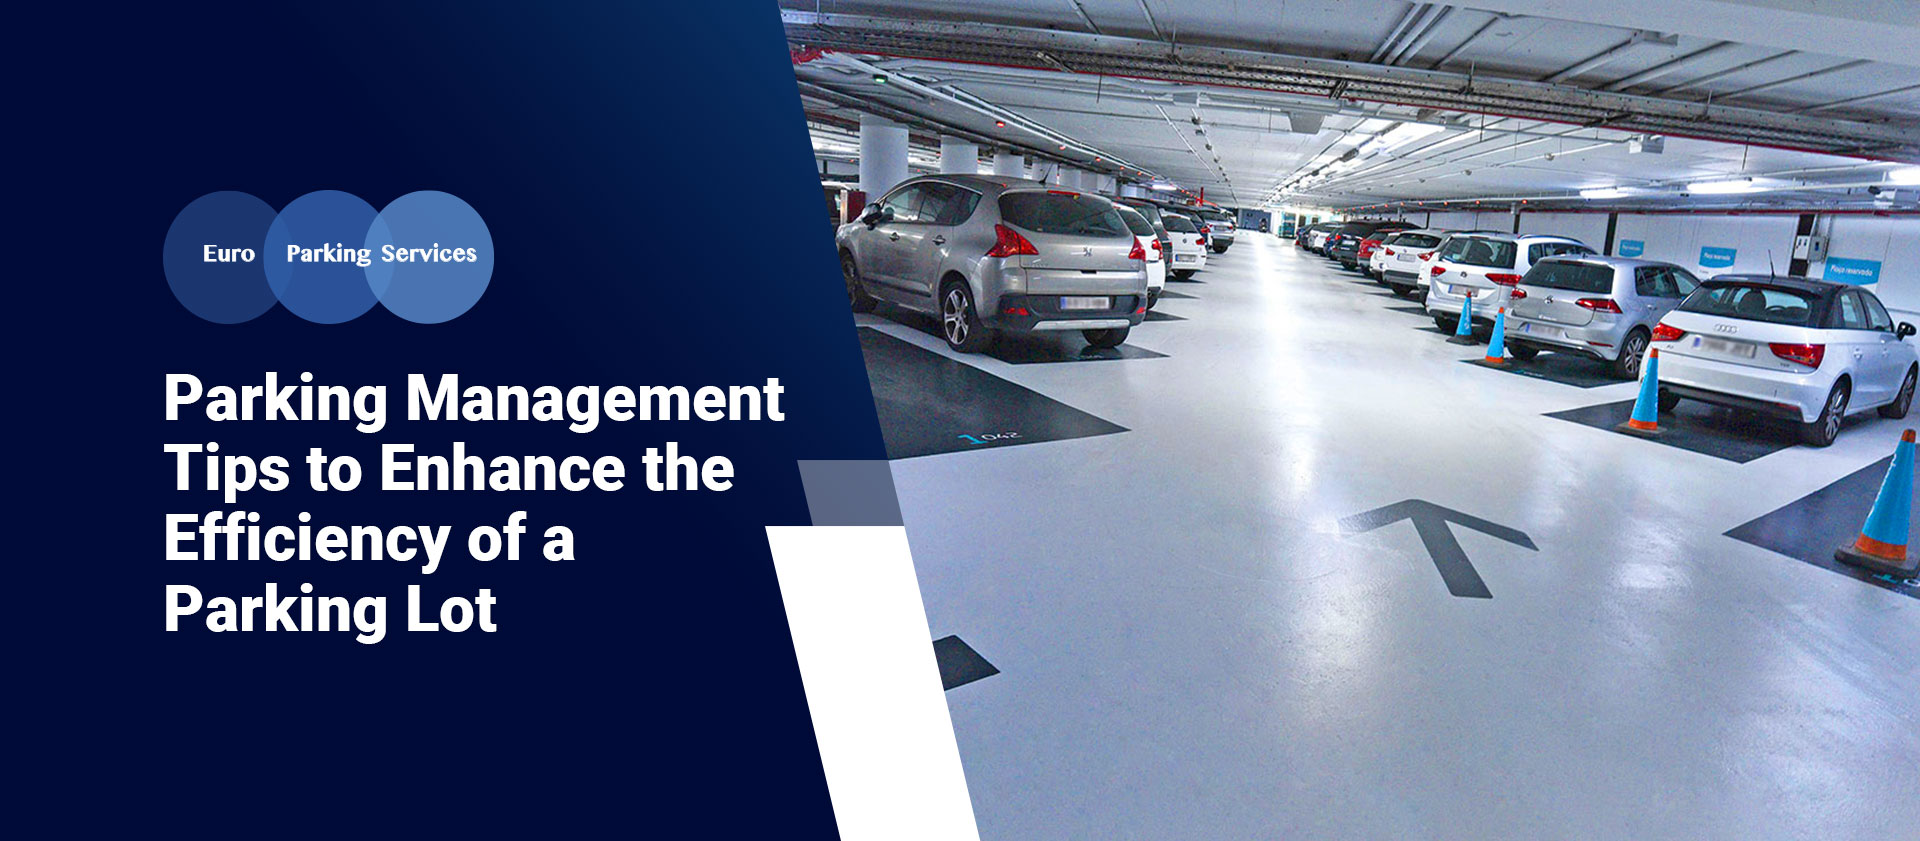 Parking Management Tips to Enhance the Efficiency of a Parking Lot